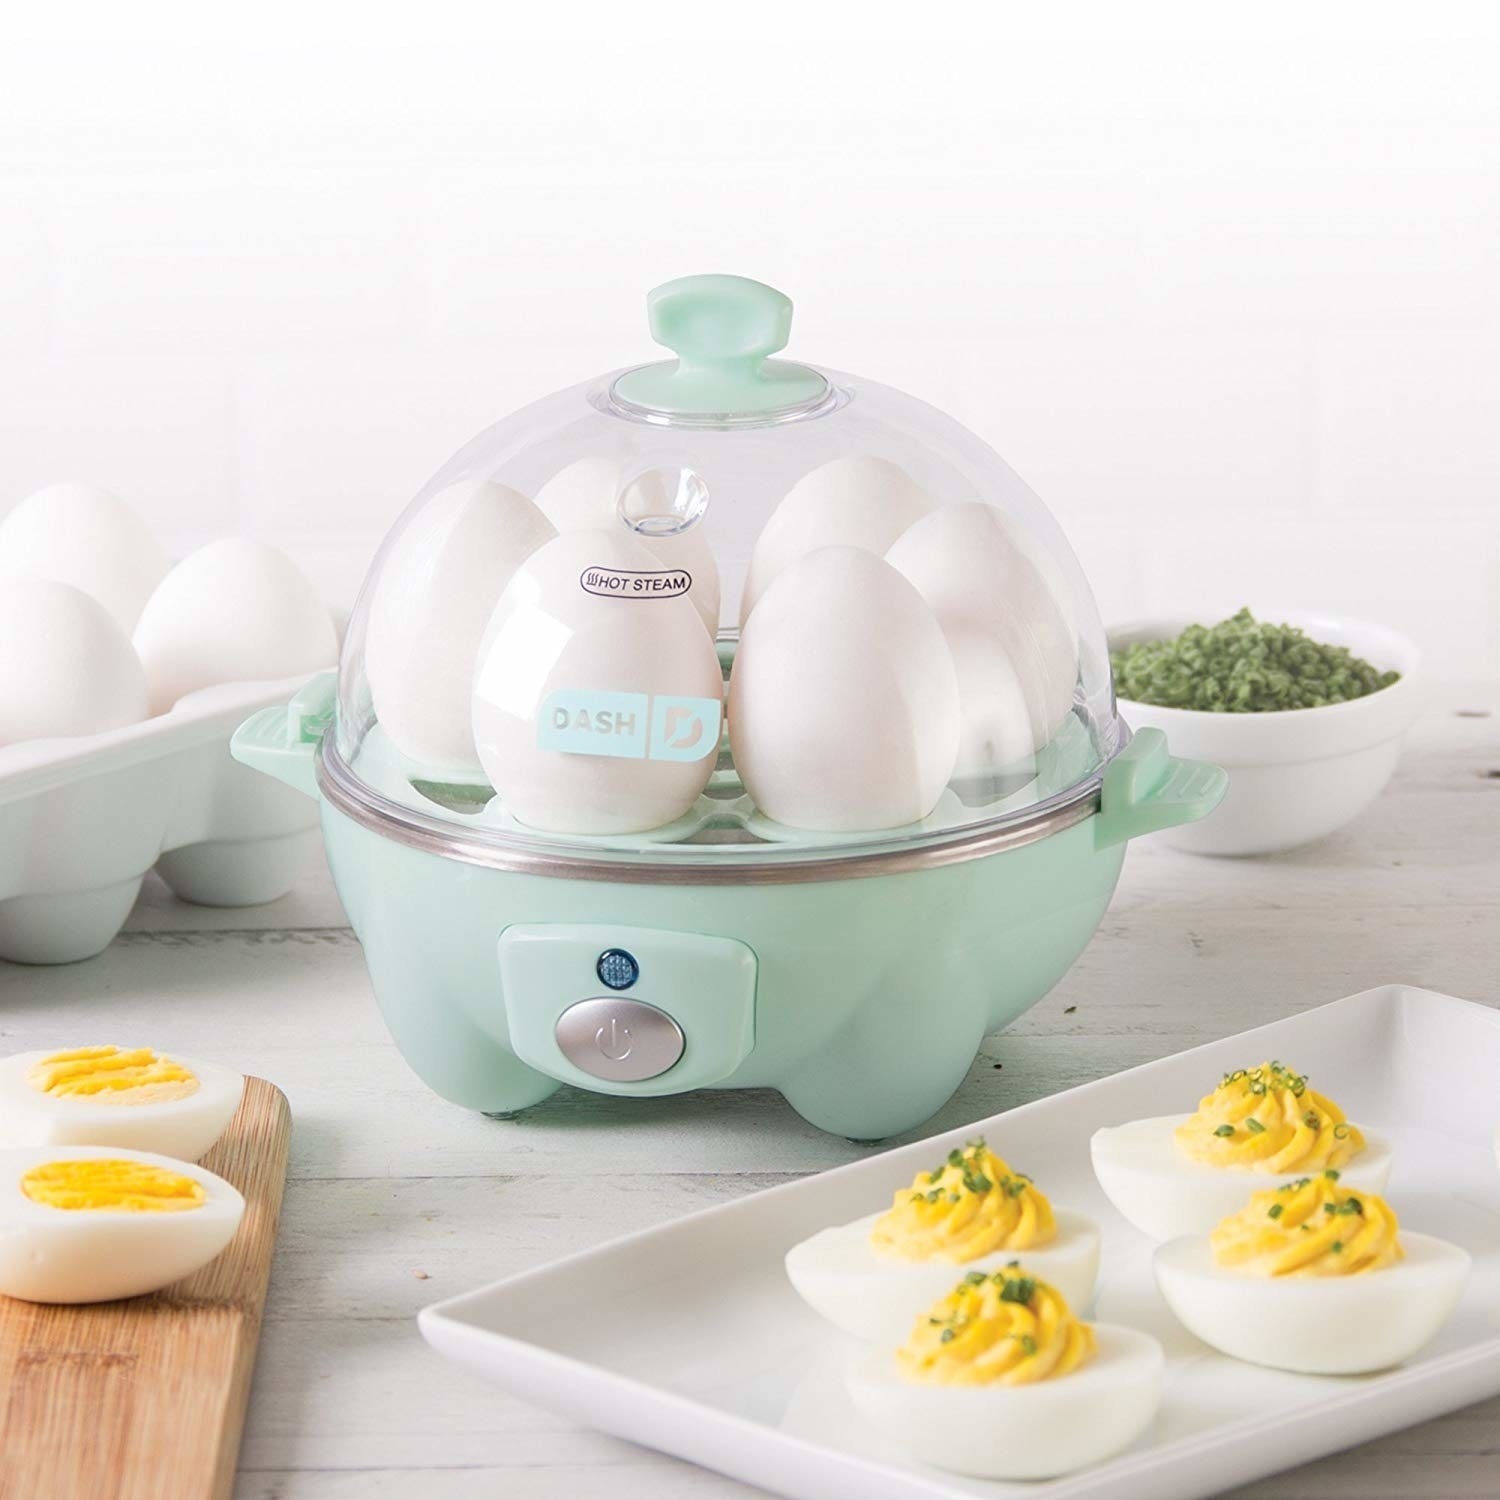 The cooker, which is a little pod with an opaque base and a clear lid; six eggs sit on top of the base, and are covered by the lid